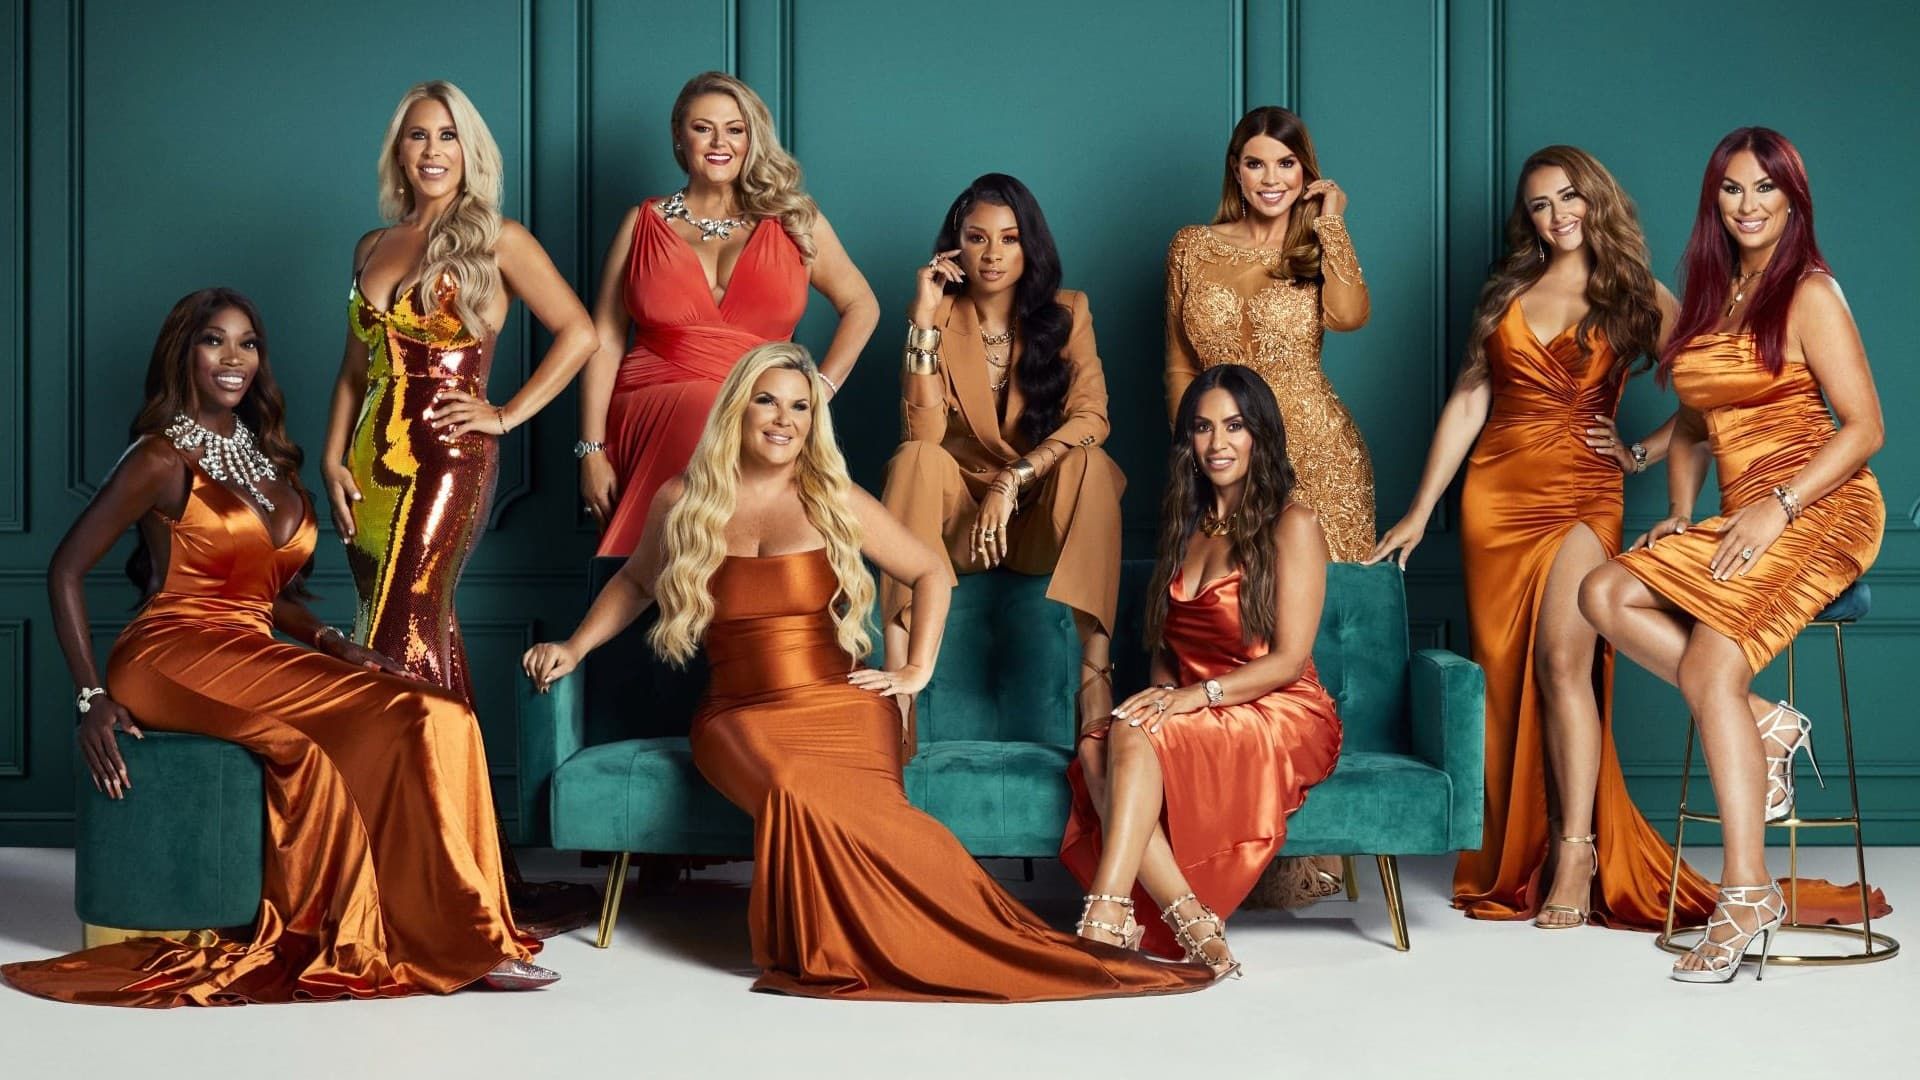 The Real Housewives of Cheshire background